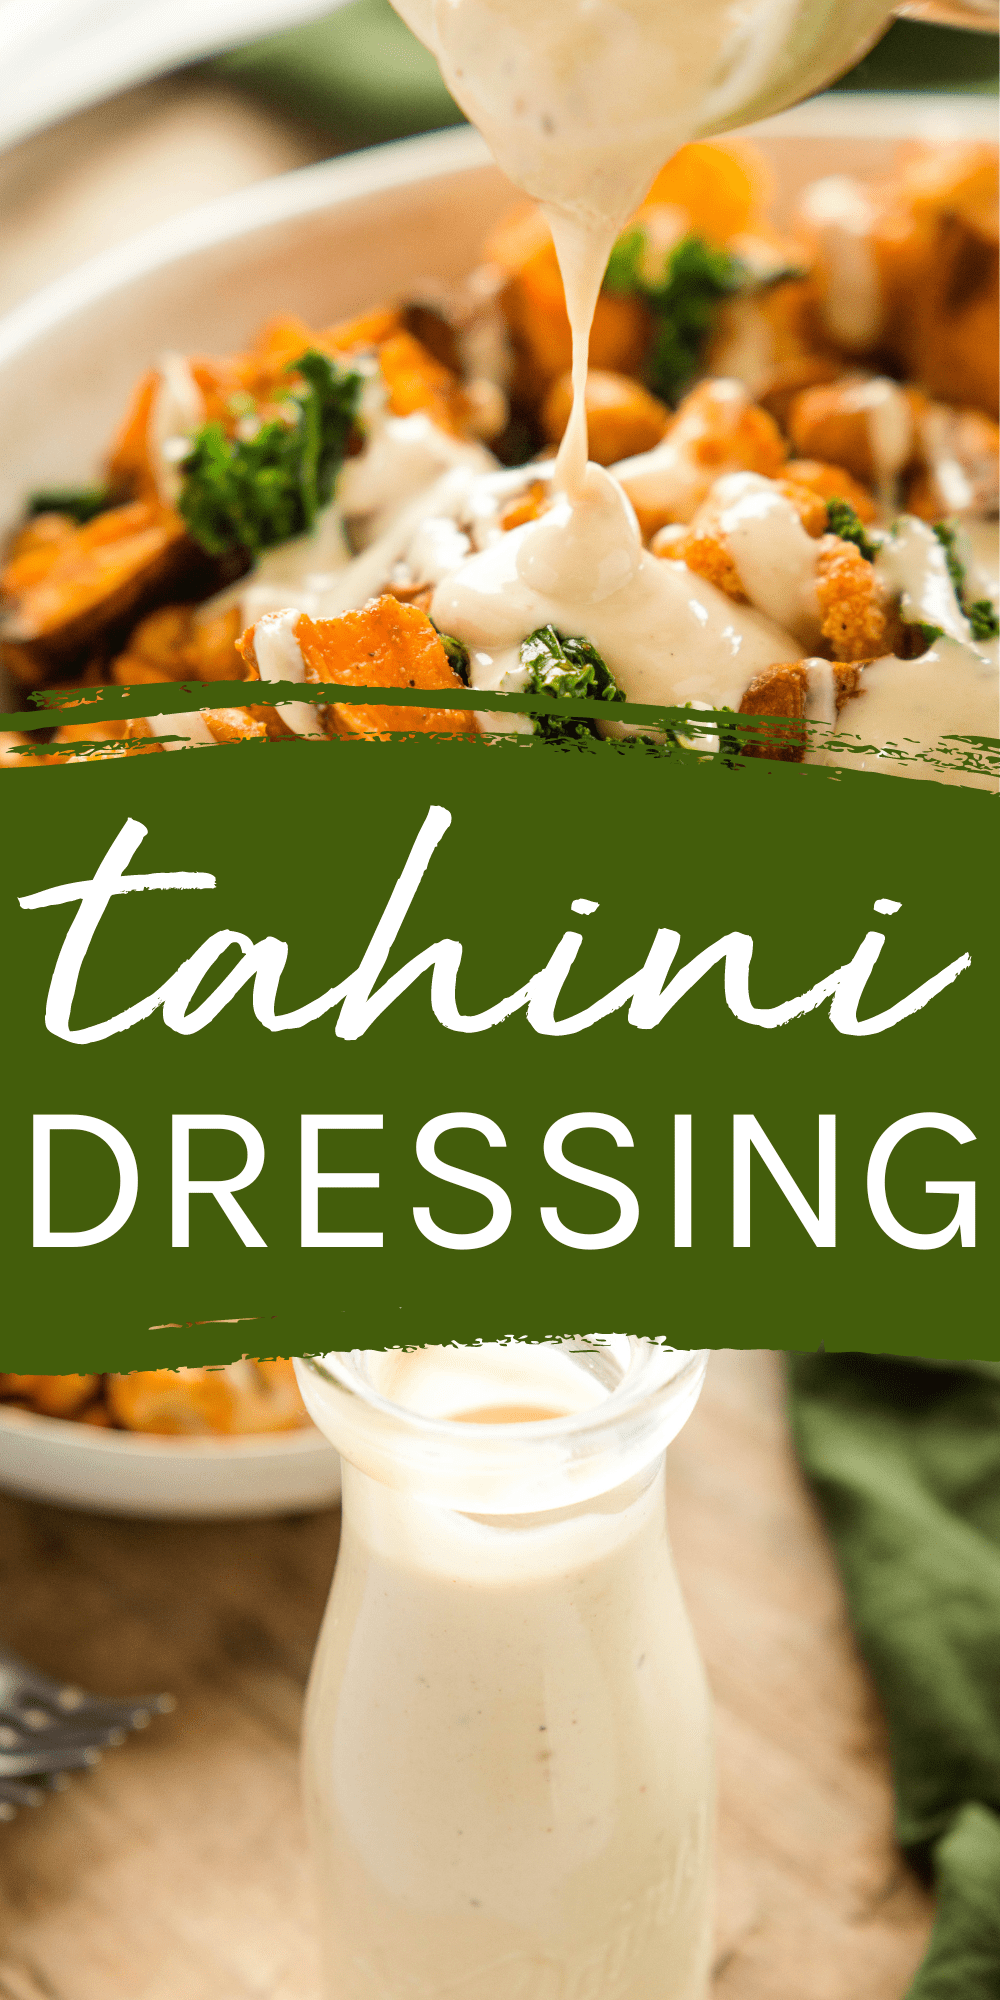 This Tahini Dressing is creamy, smooth and savoury. It's the perfect vegan dressing for all your favourite salads, power bowls, and roasted veggies. Ready in 10 minutes! Recipe from thebusybaker.ca! #tahinidressing #lemontahinidressing #tahinisaladdressing #tahinidressingrecipe via @busybakerblog